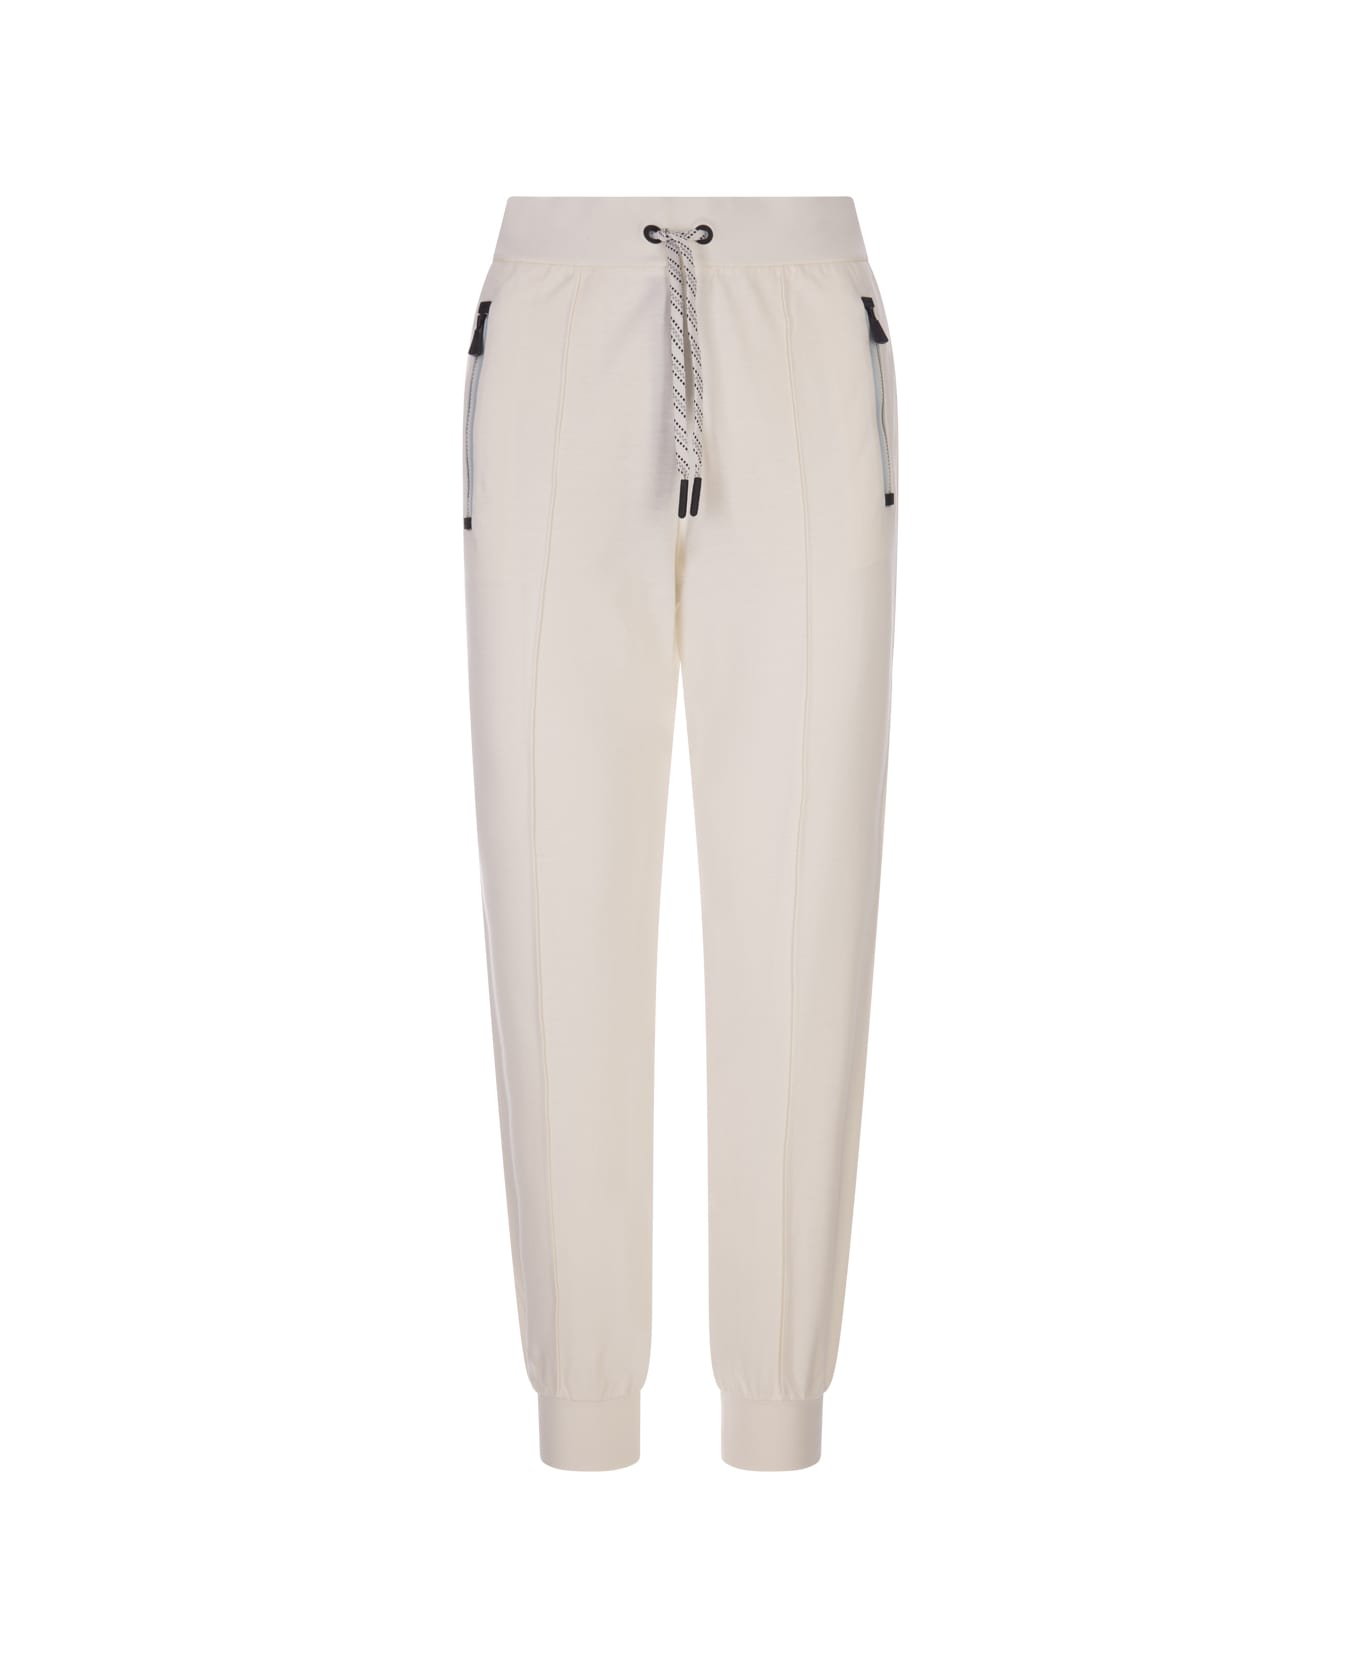 Moncler Grenoble White Joggers With Contrast Drawstring - Bianco スウェットパンツ